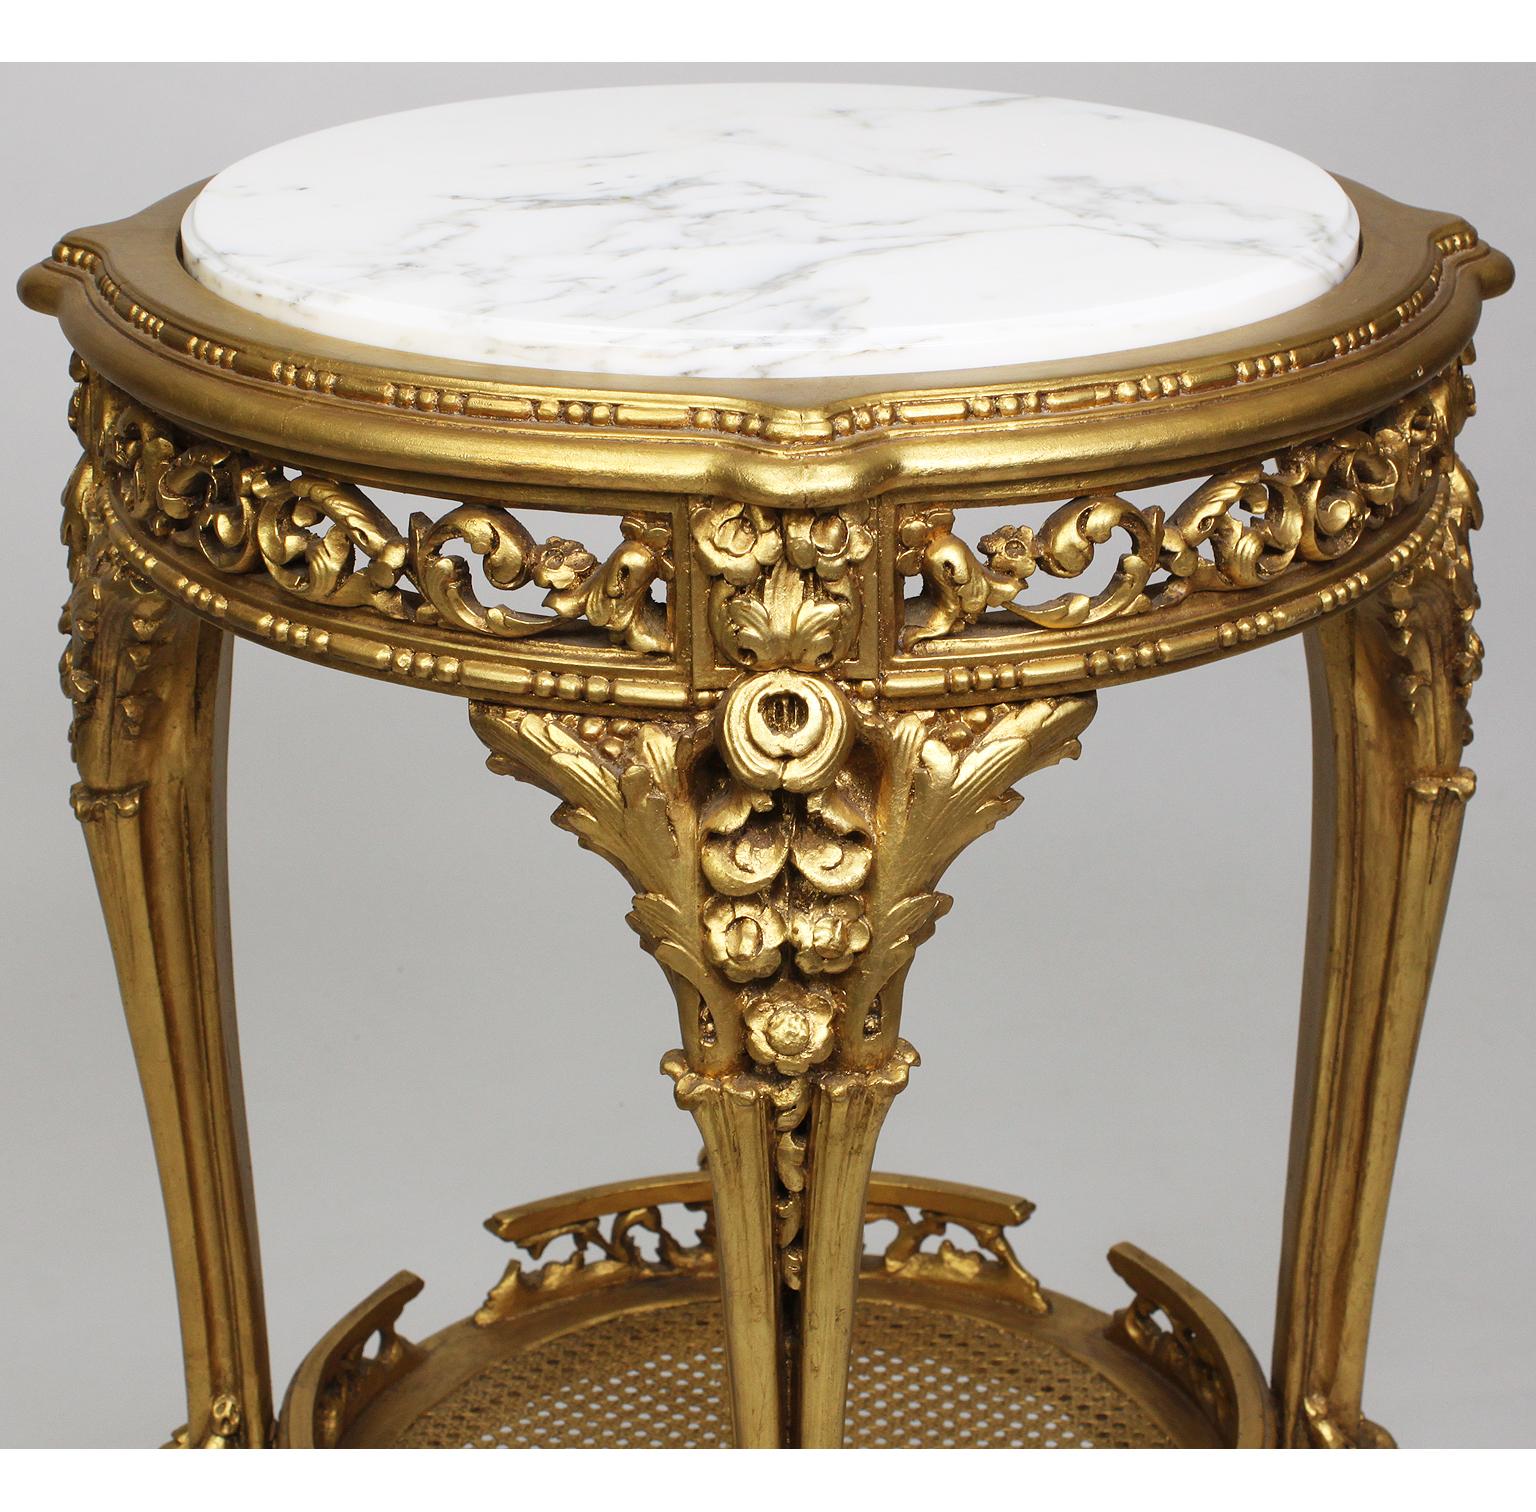 Early 20th Century French Louis XV Style 'Belle Époque' Giltwood Carved Guéridon Table Marble Top For Sale